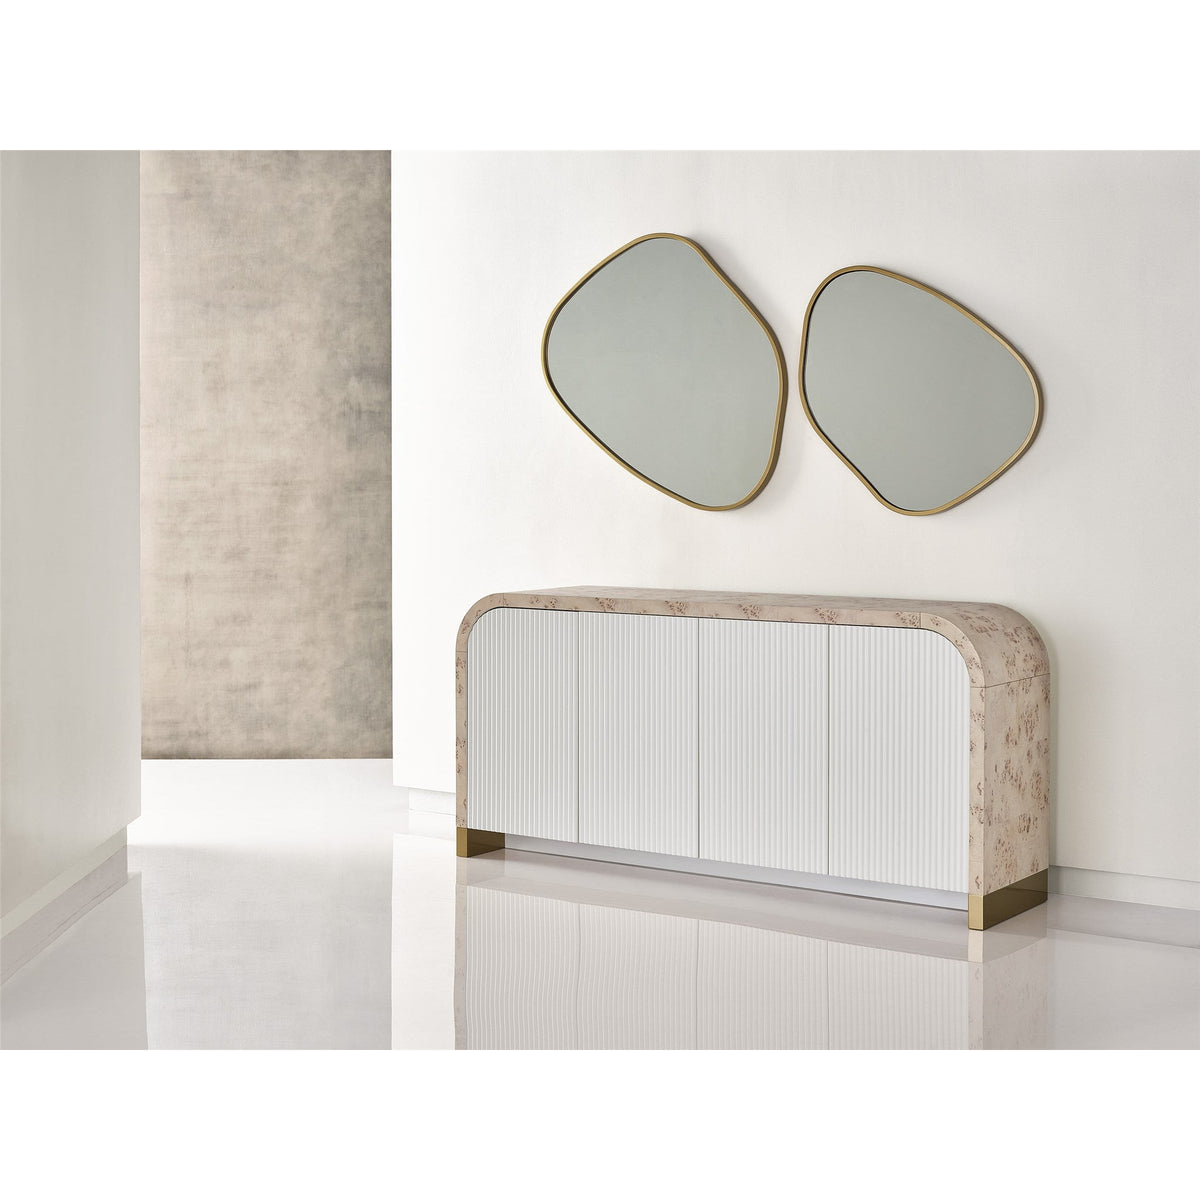 Gallett Accent Mirror Large - Be Bold Furniture